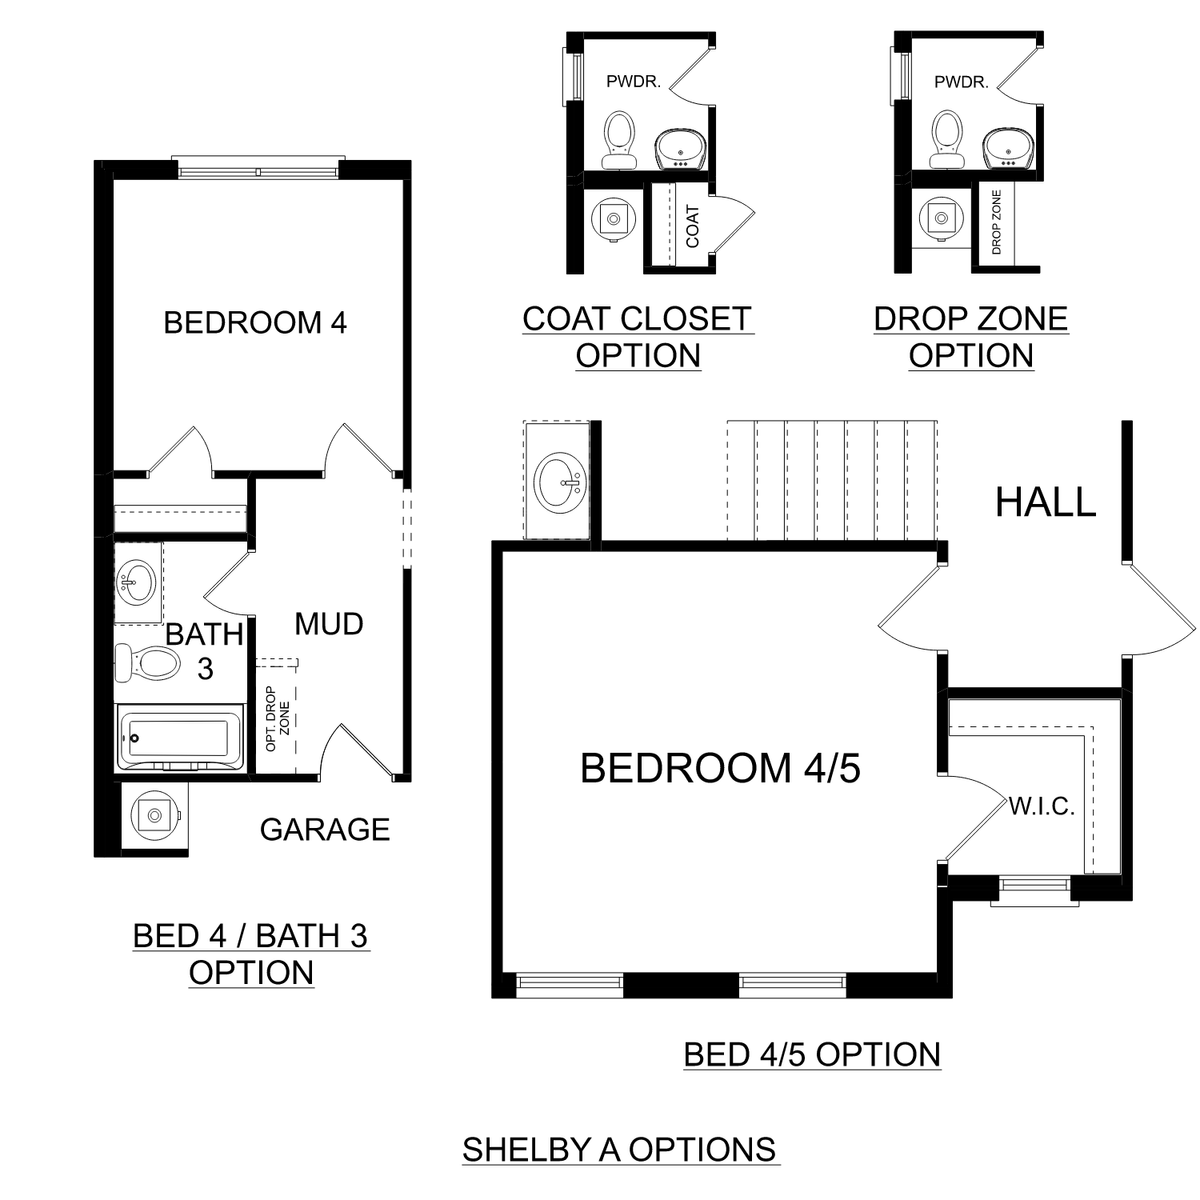 3 - The Shelby A buildable floor plan layout in Davidson Homes' Walker's Hill community.